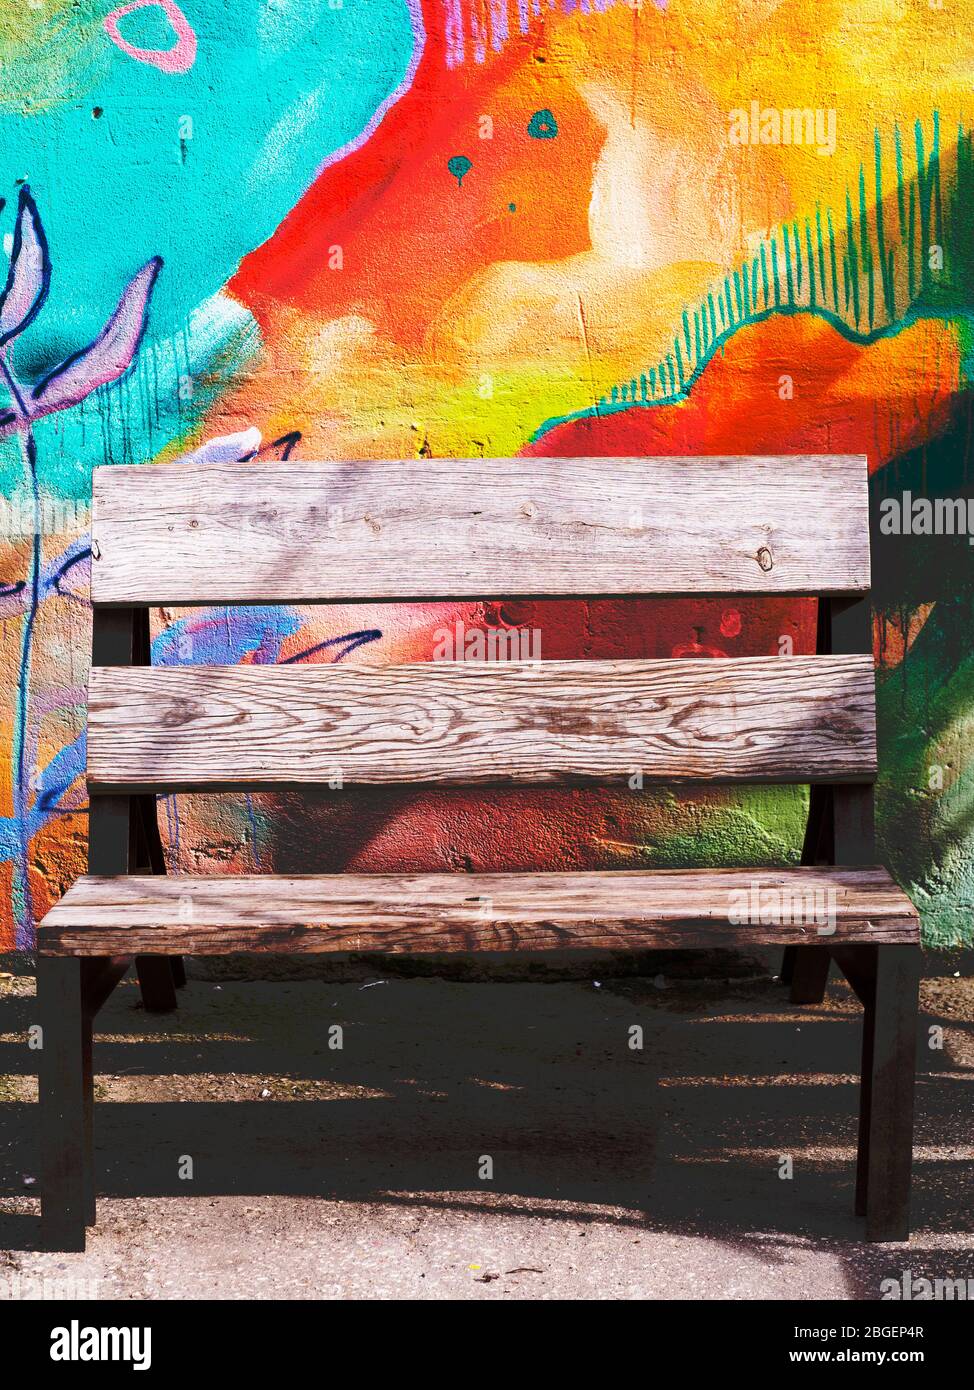 Narrow wooden bench against colorful artistic background wall Stock Photo